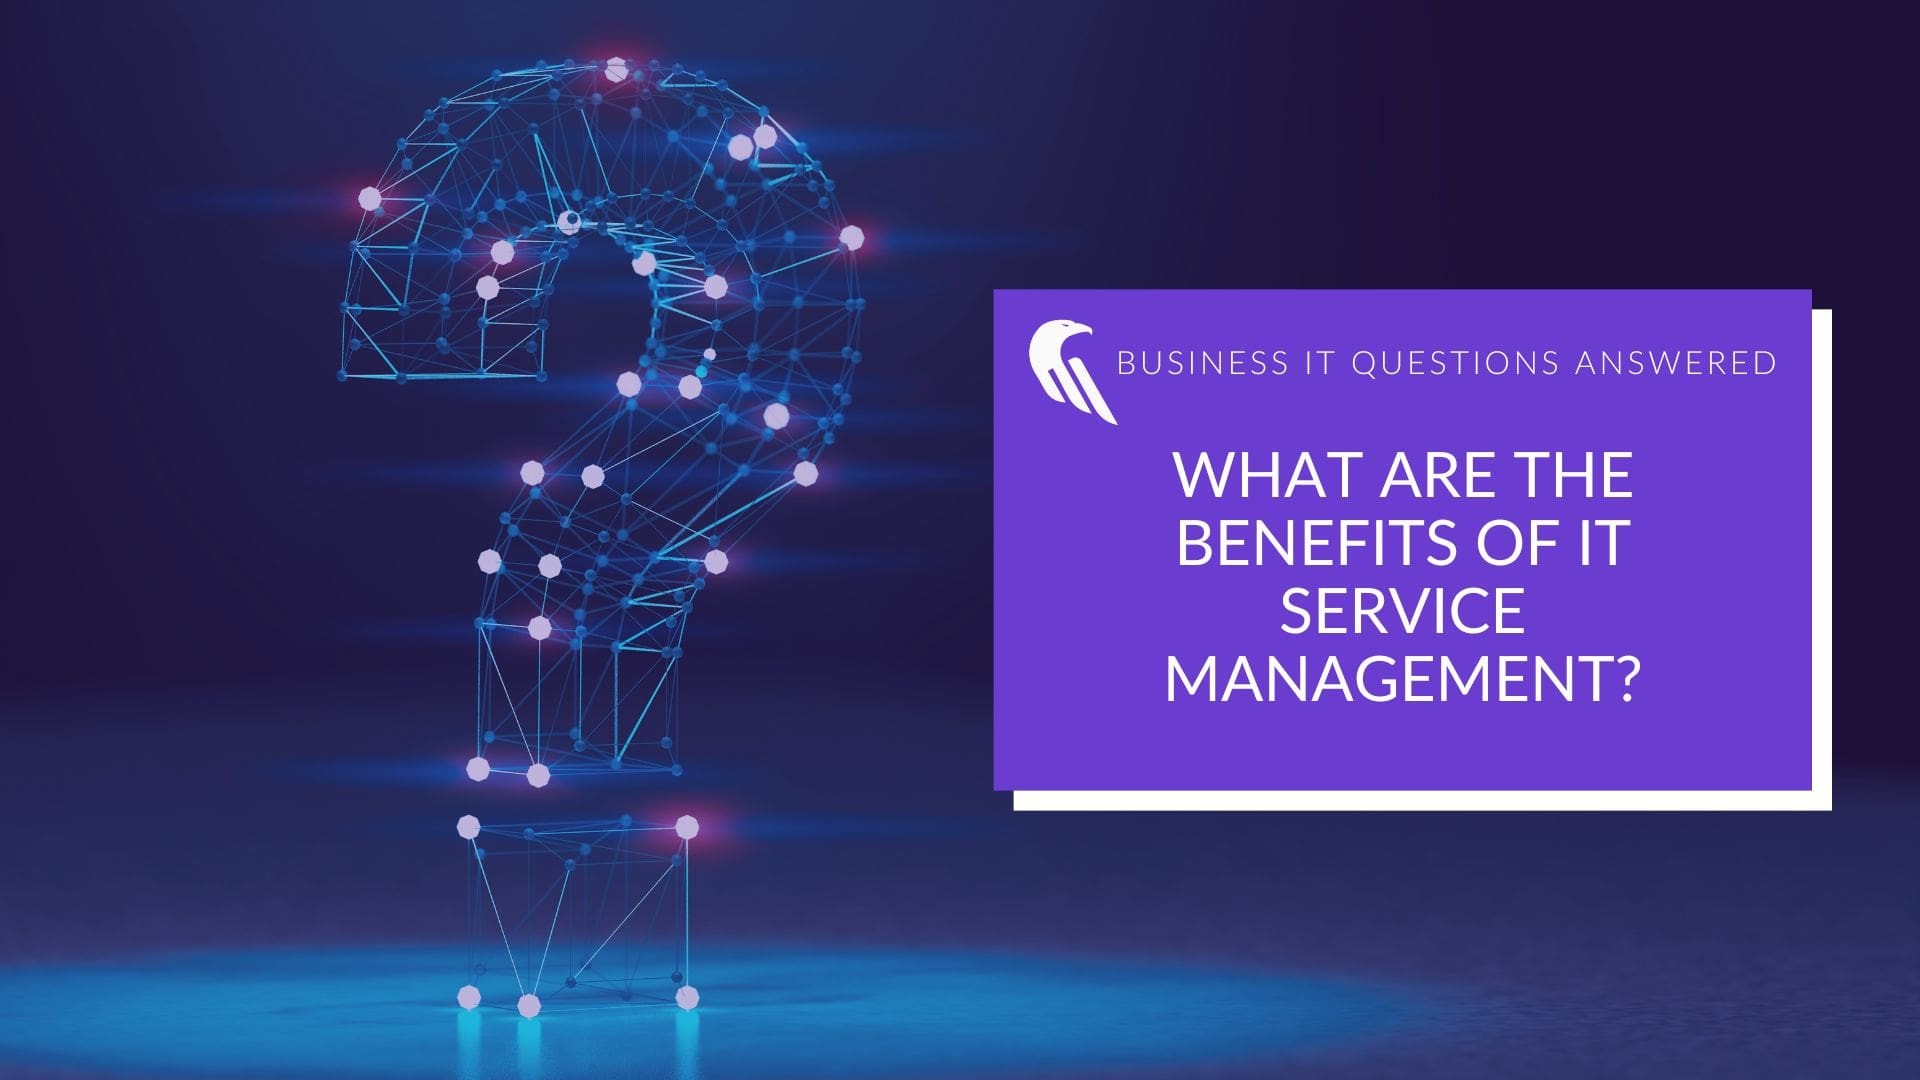 What Are The Benefits of IT Service Management